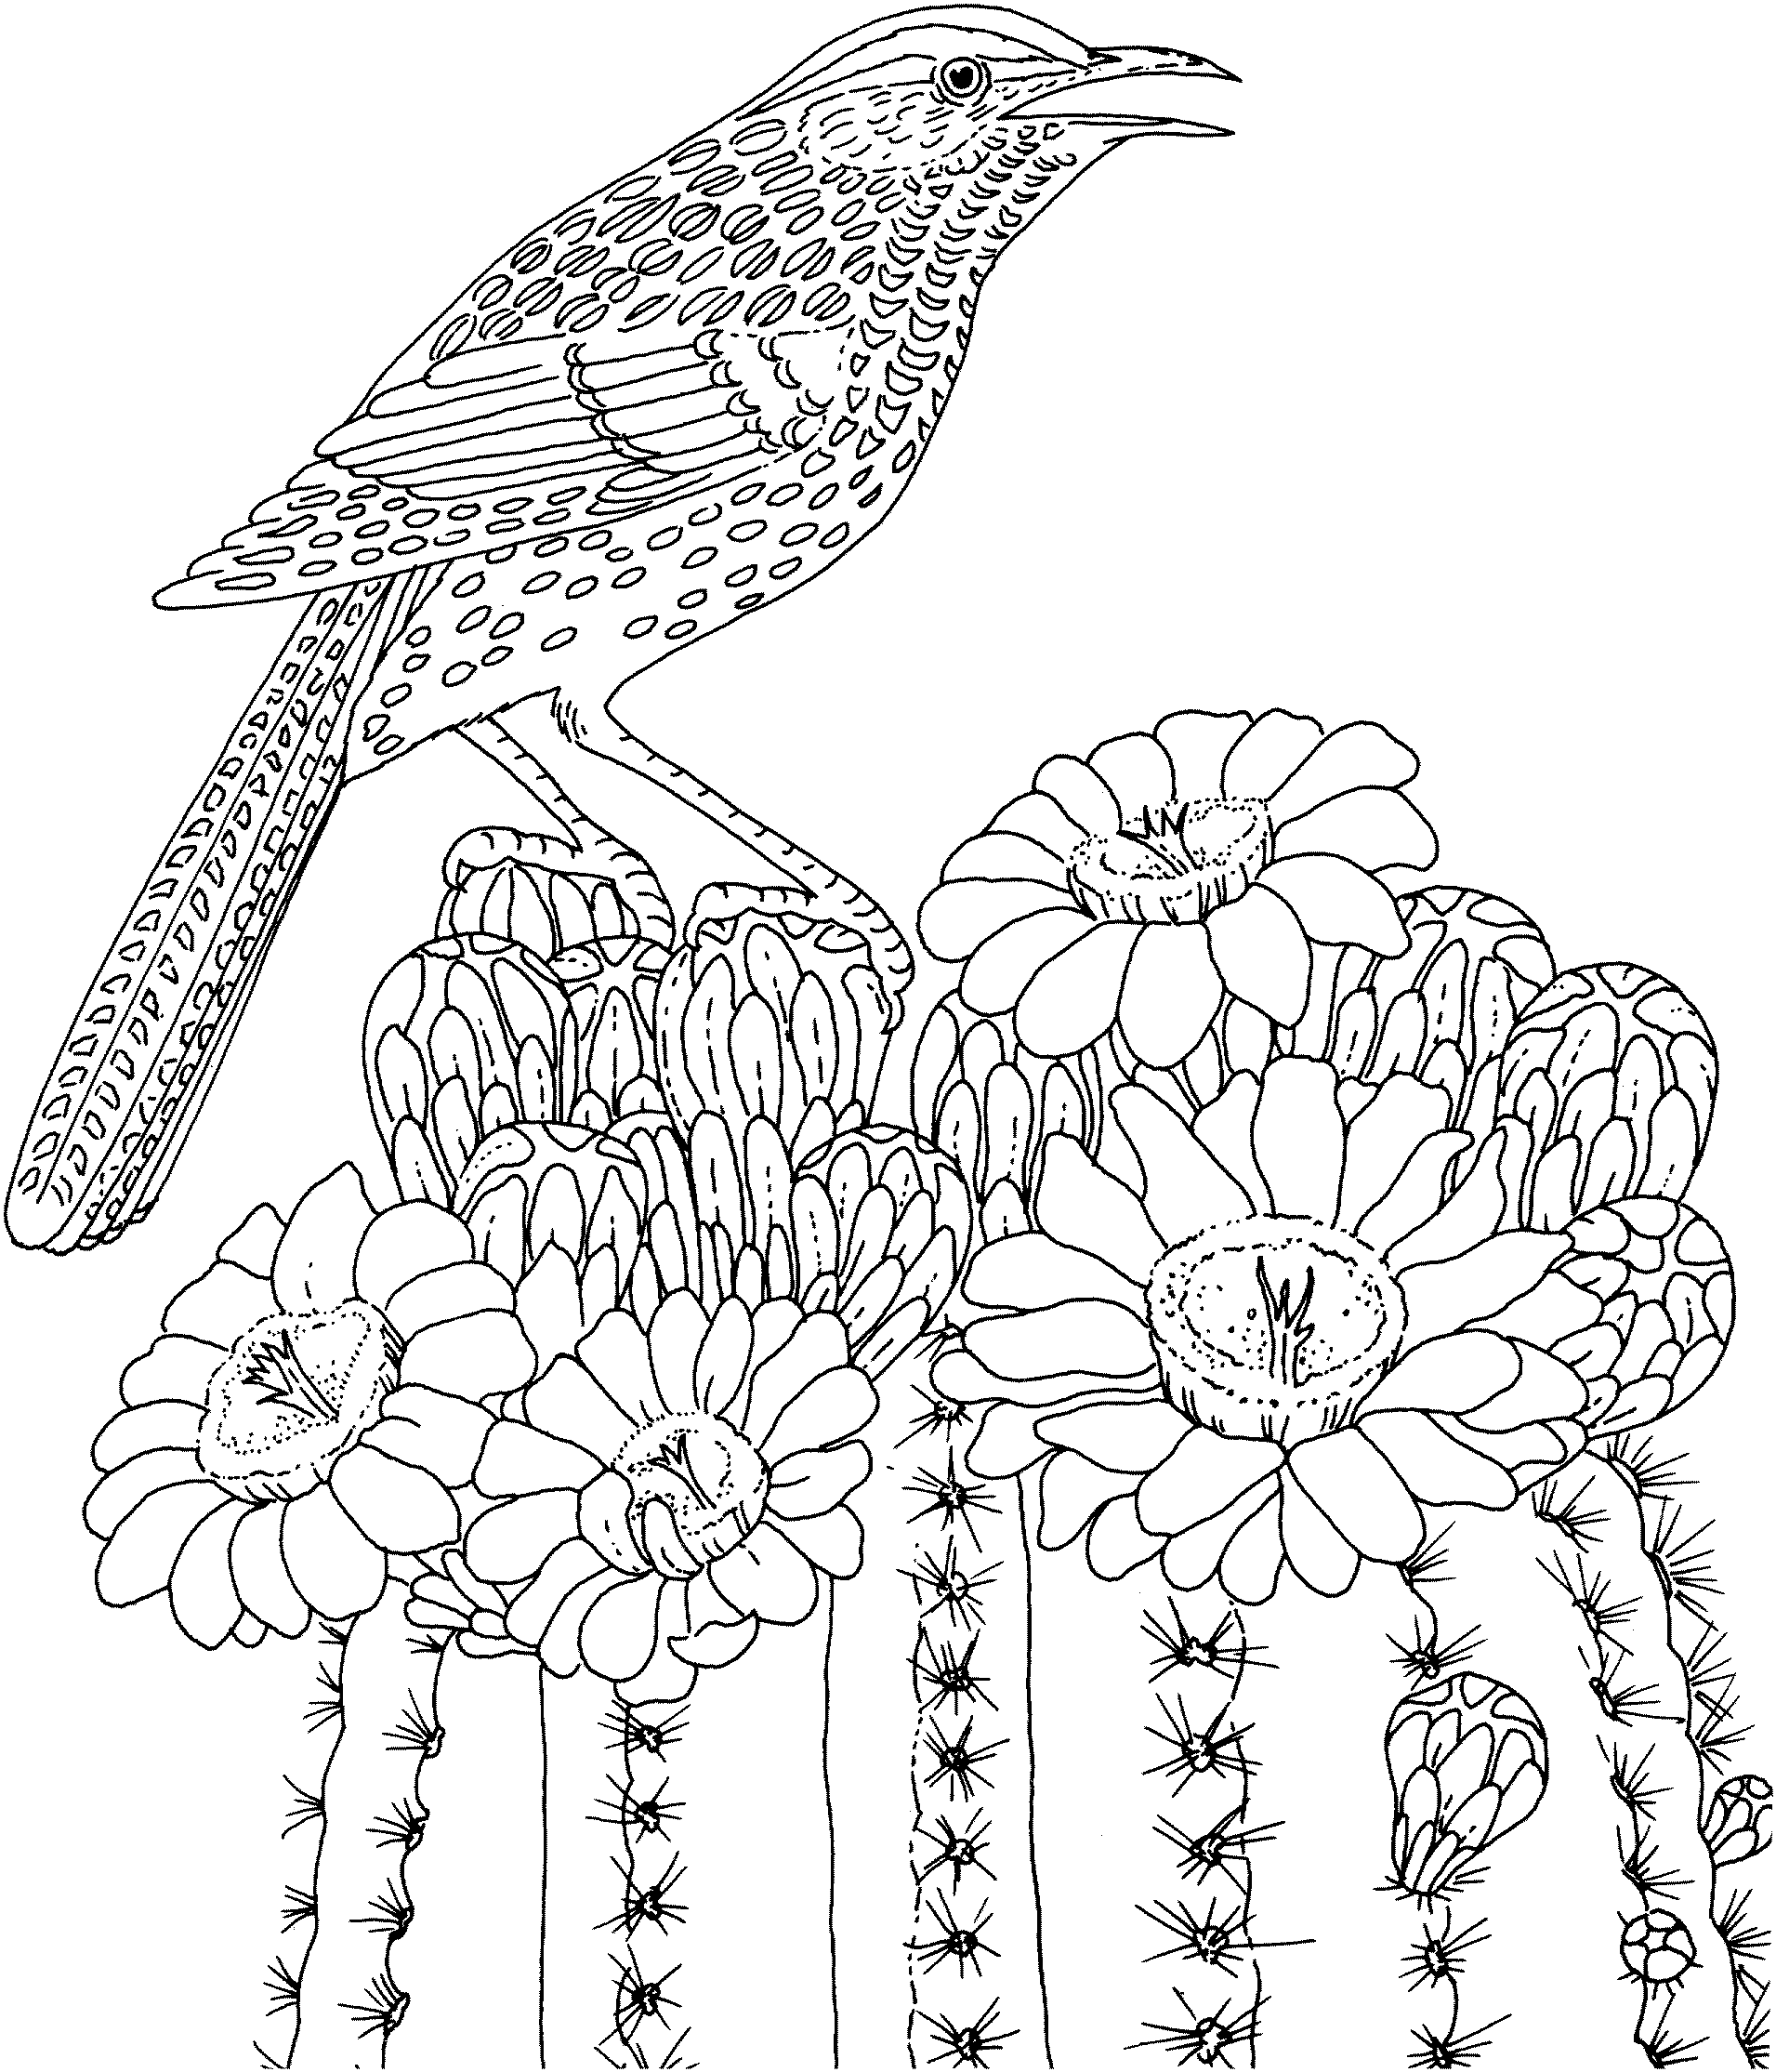 Bird and Flower Coloring Page for Adults